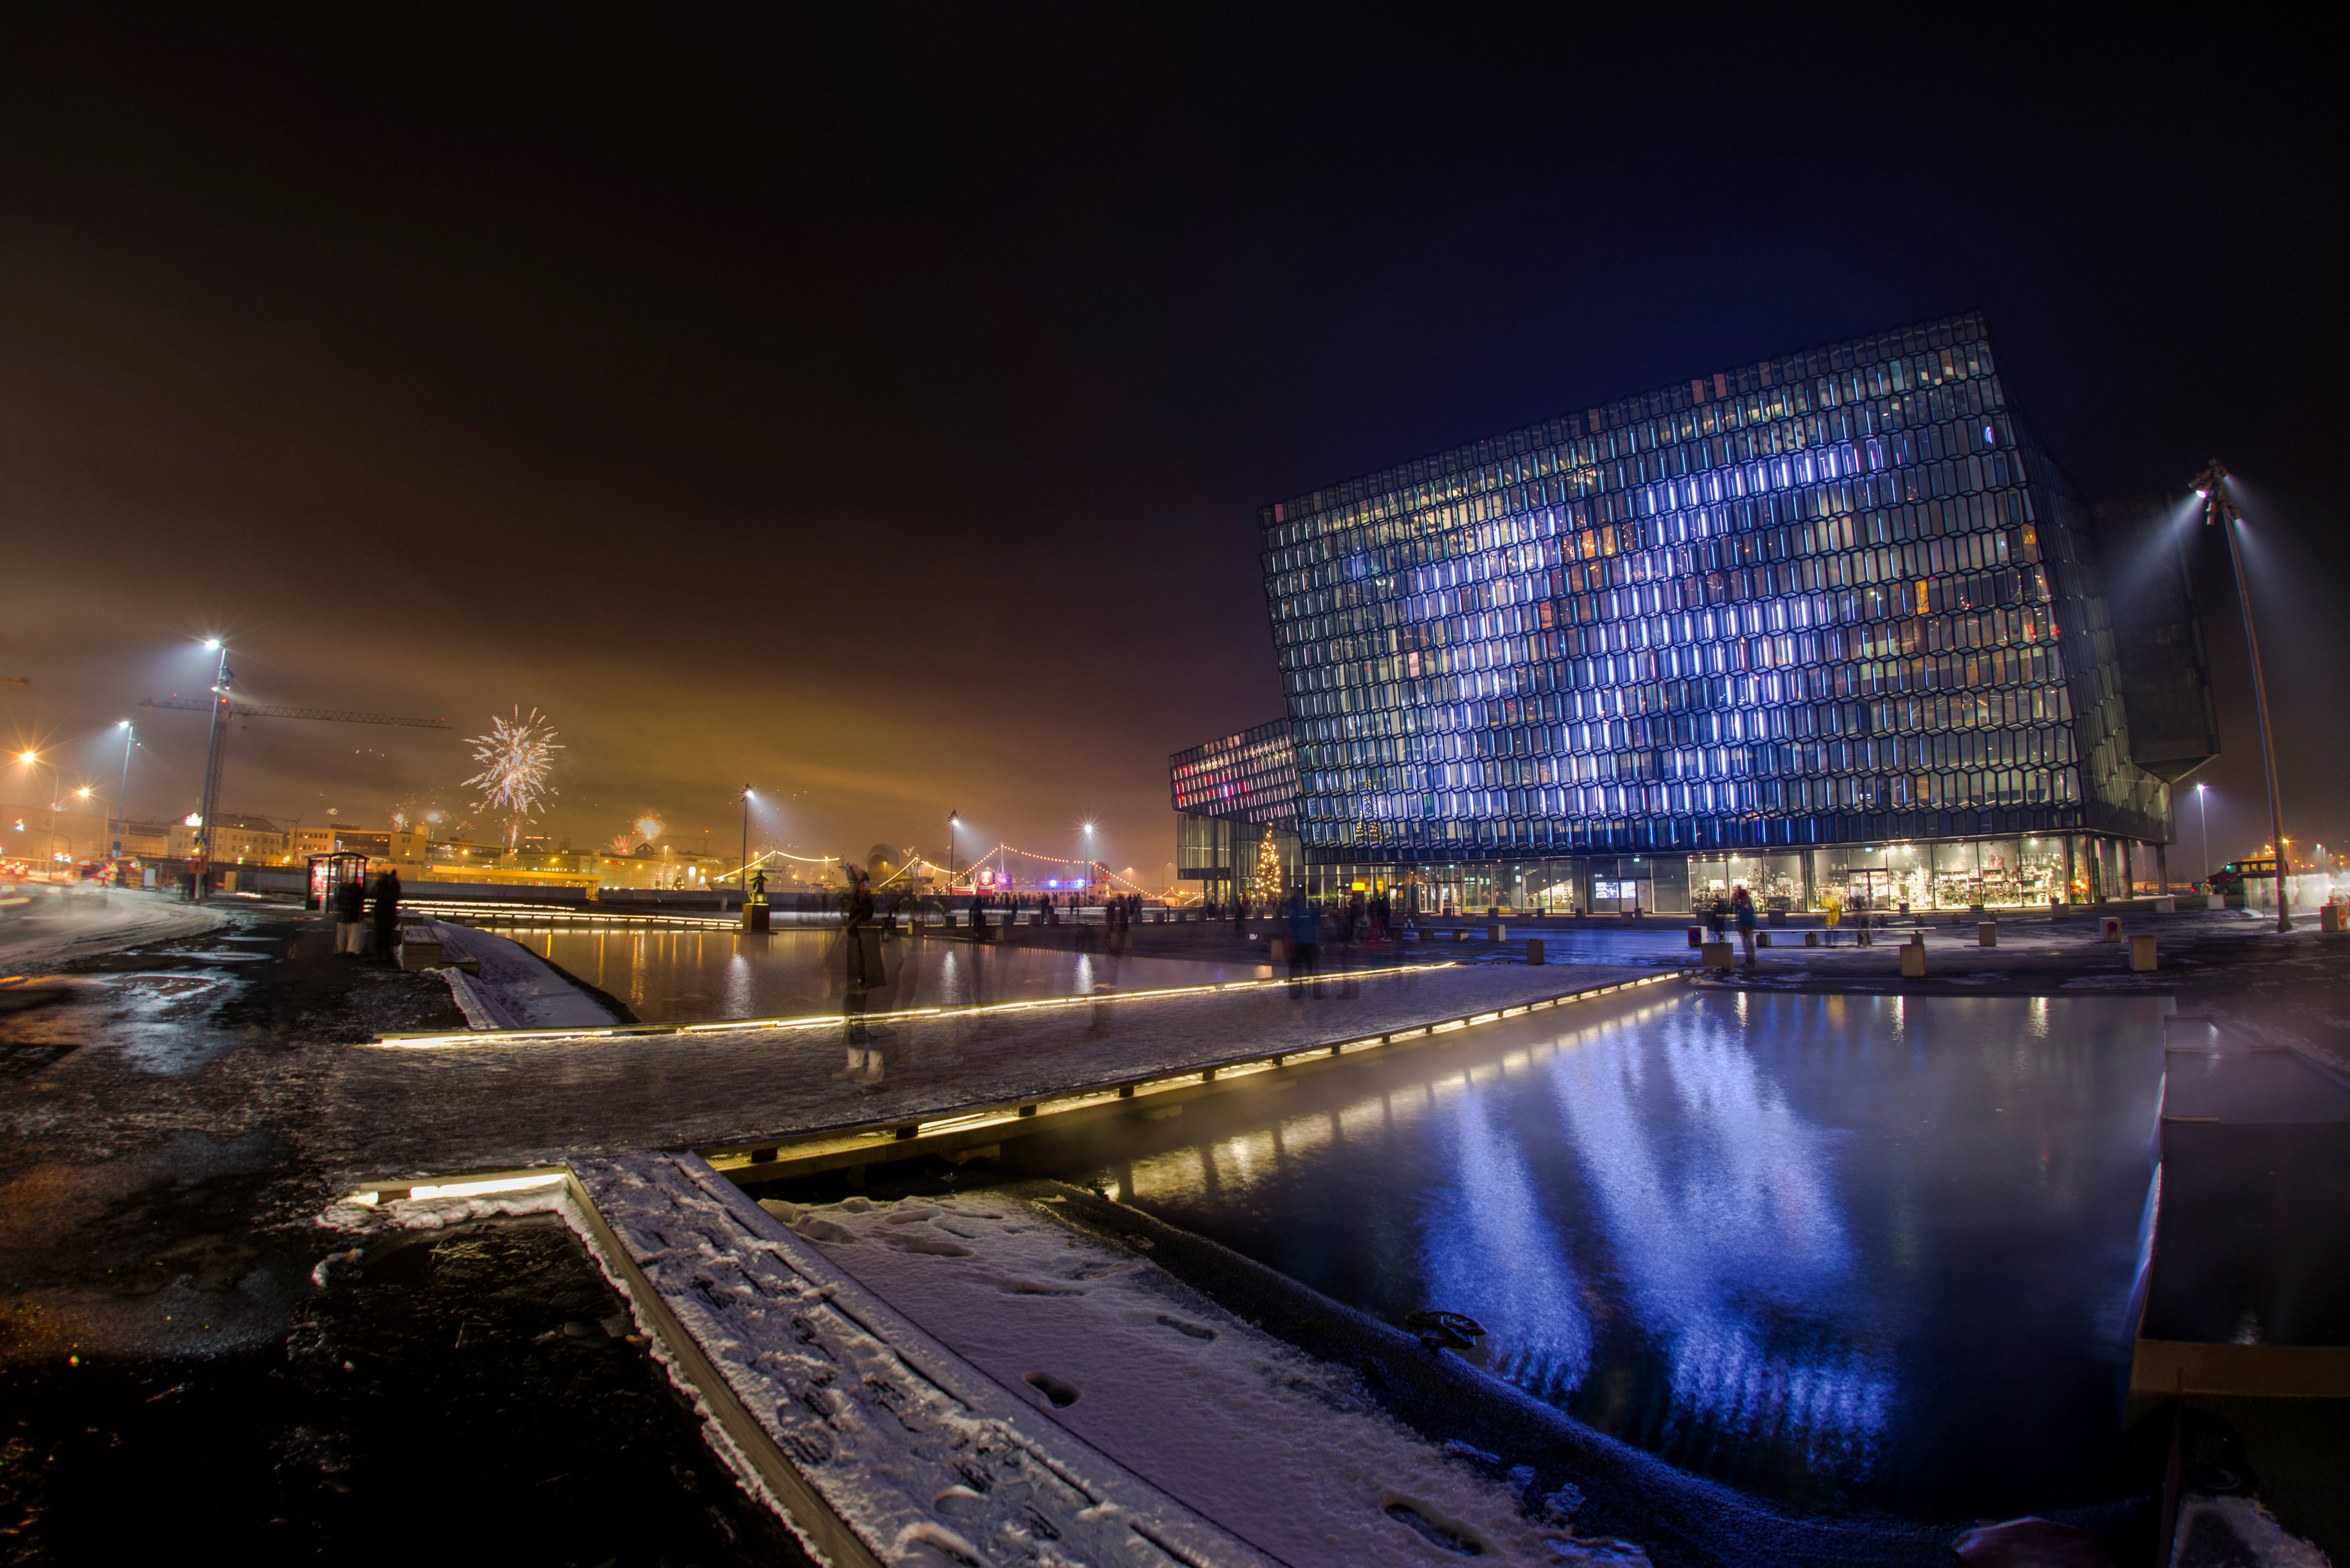 A view of the Harpa concert hall which held the New Year's countdown to 2017, in Reykjavik, Iceland, January 1, 2017. (Geirix / Reuters)